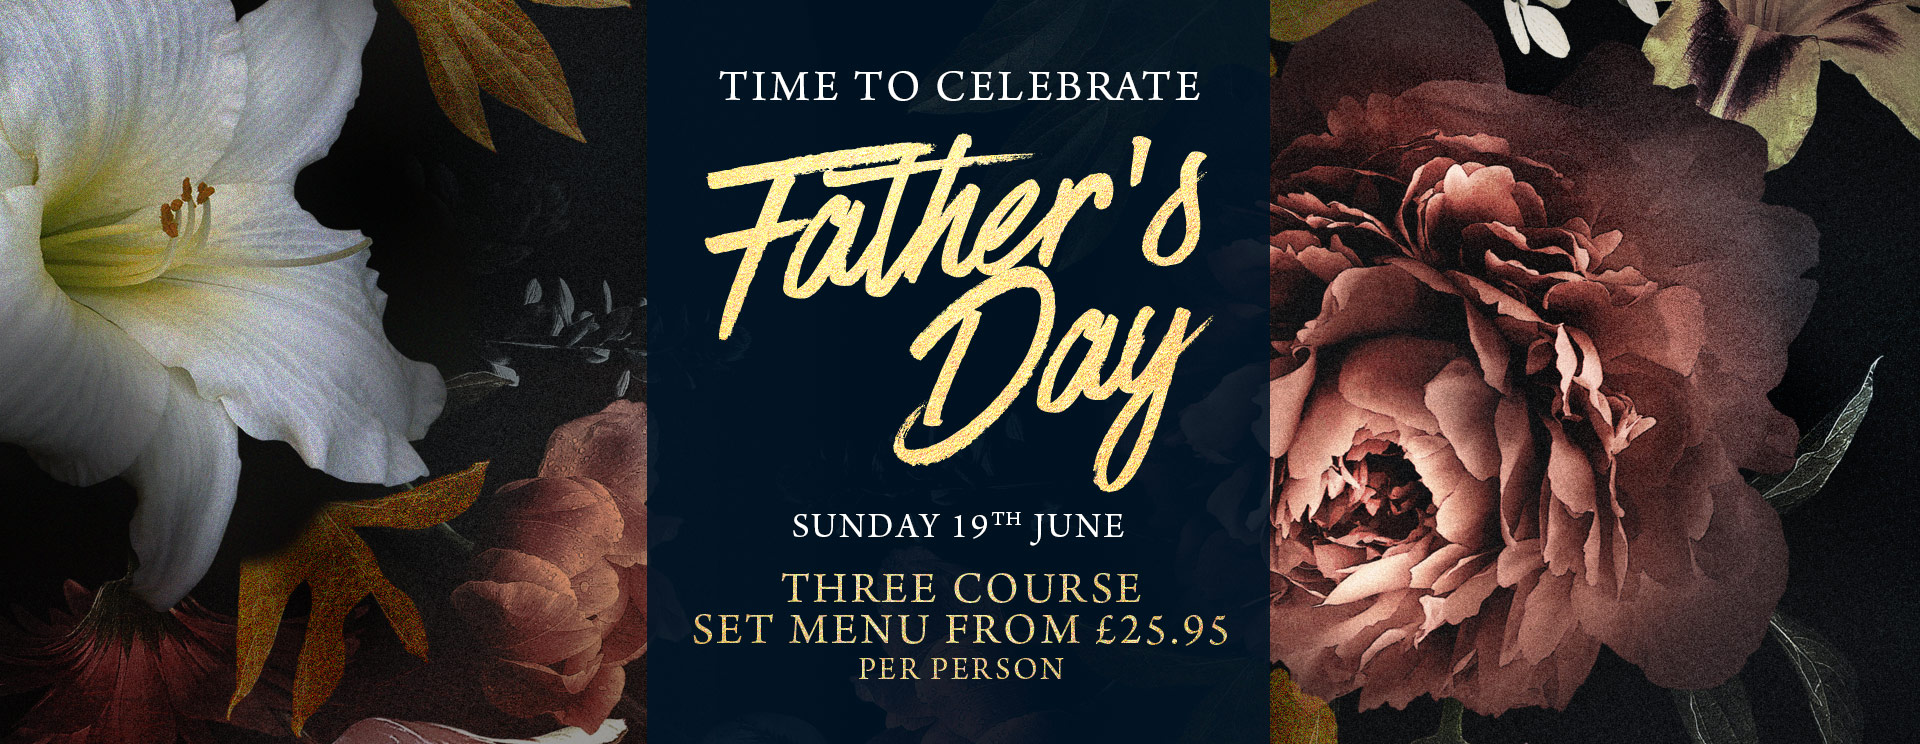 Fathers Day at The Caversham Rose